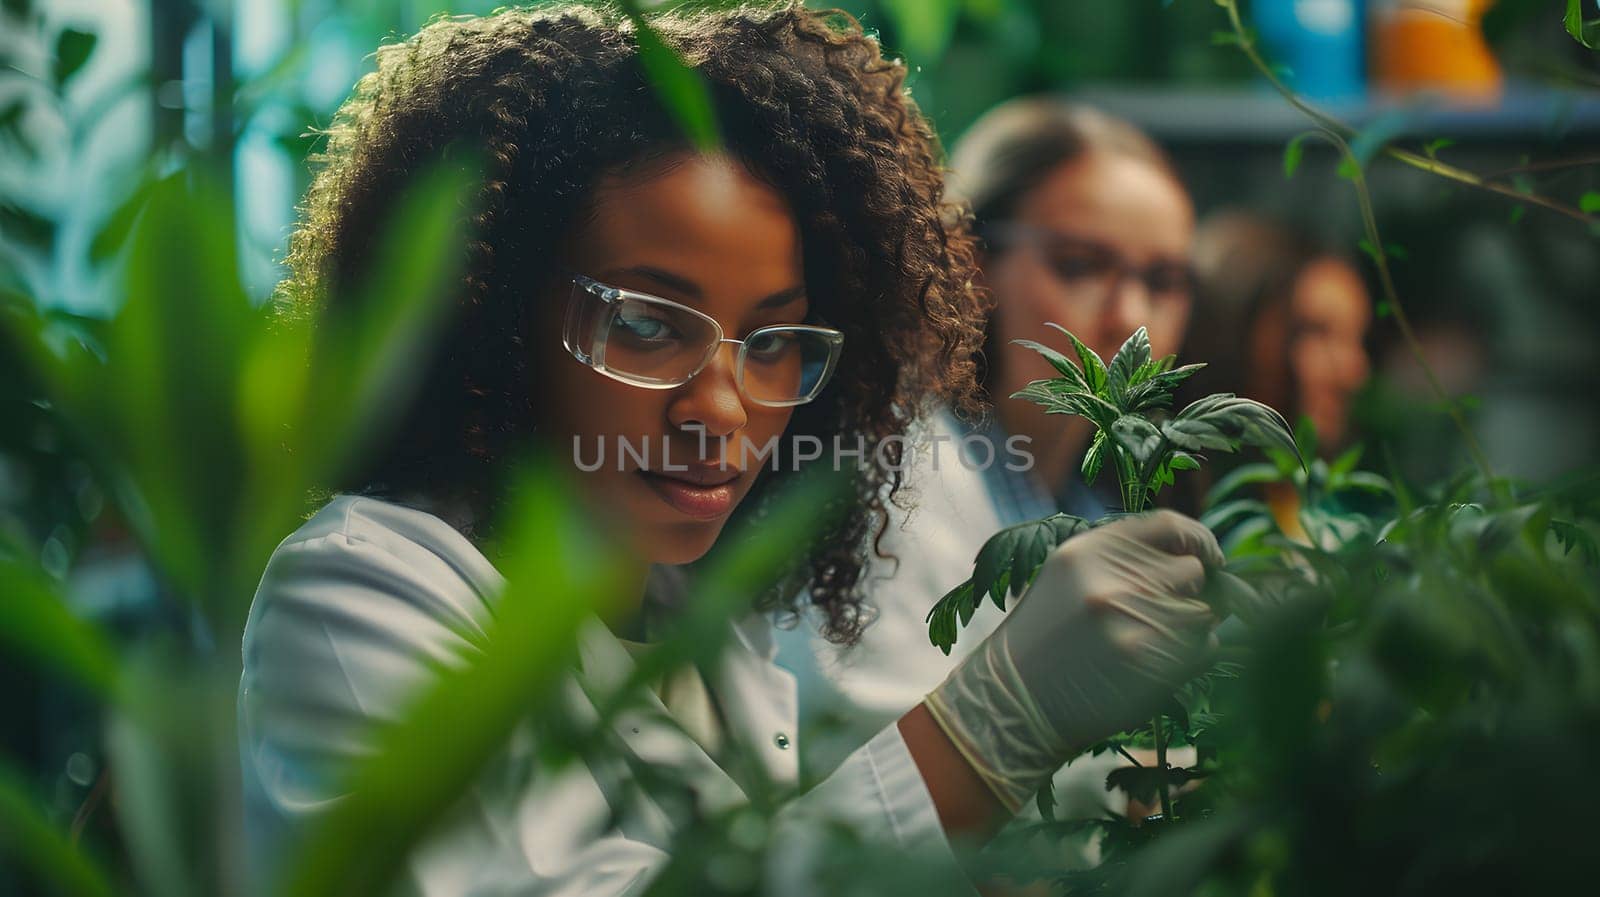 A happy woman wearing glasses is leisurely looking at a terrestrial plant in a greenhouse. She is enjoying a fun vision care event with eyewear while admiring the green grass